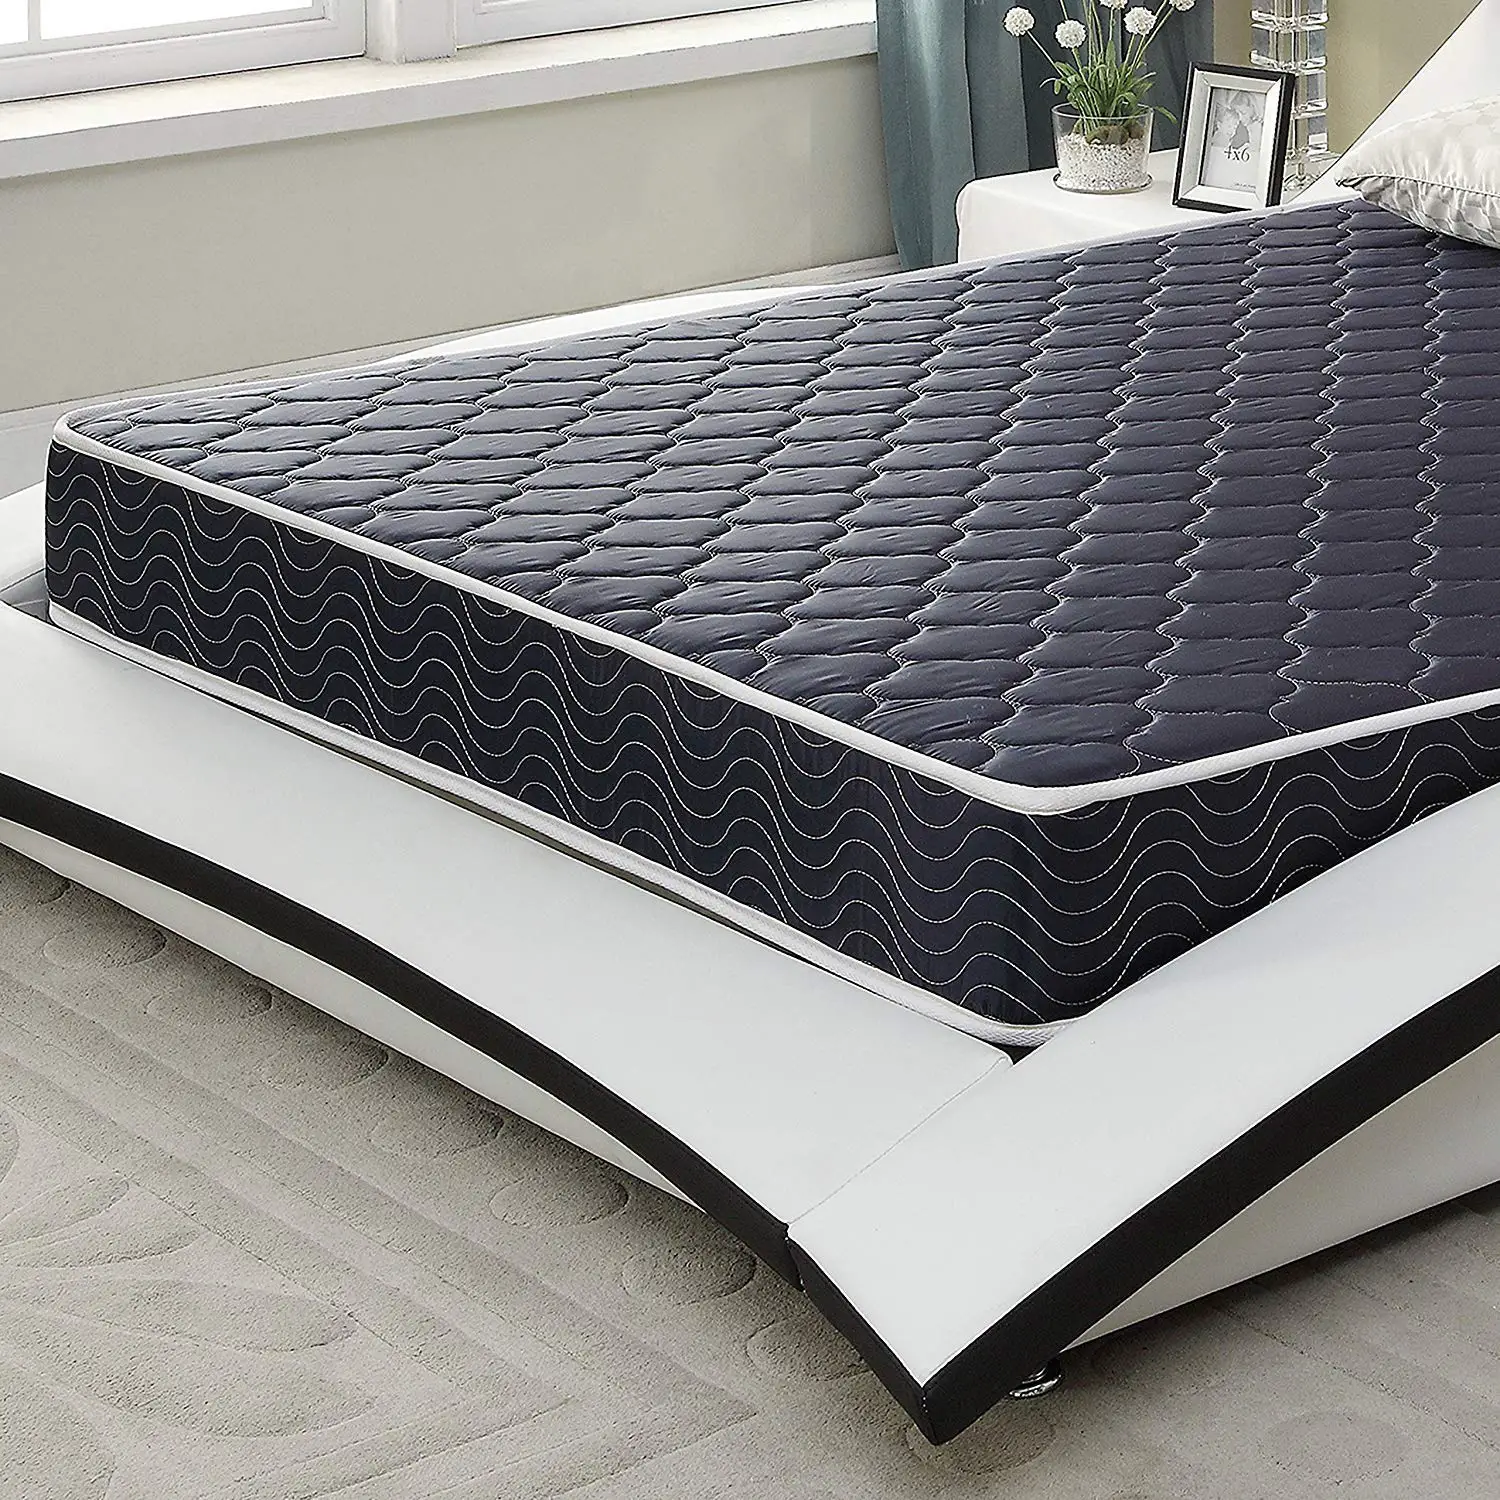 AC Pacific Mattresses Reviews (Jul. 2021)  Specs and Features